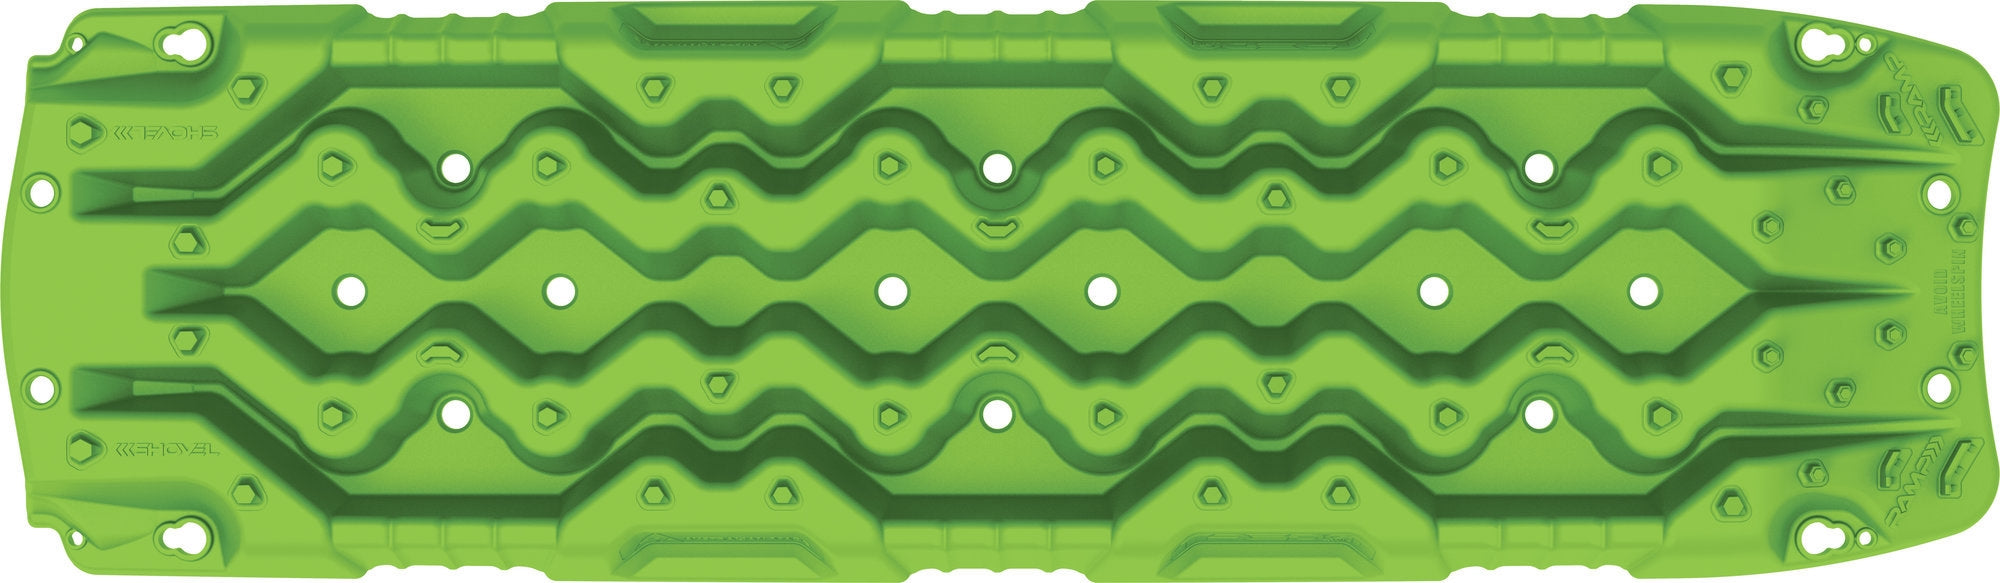 ARB Tred GT Recovery Boards - Green